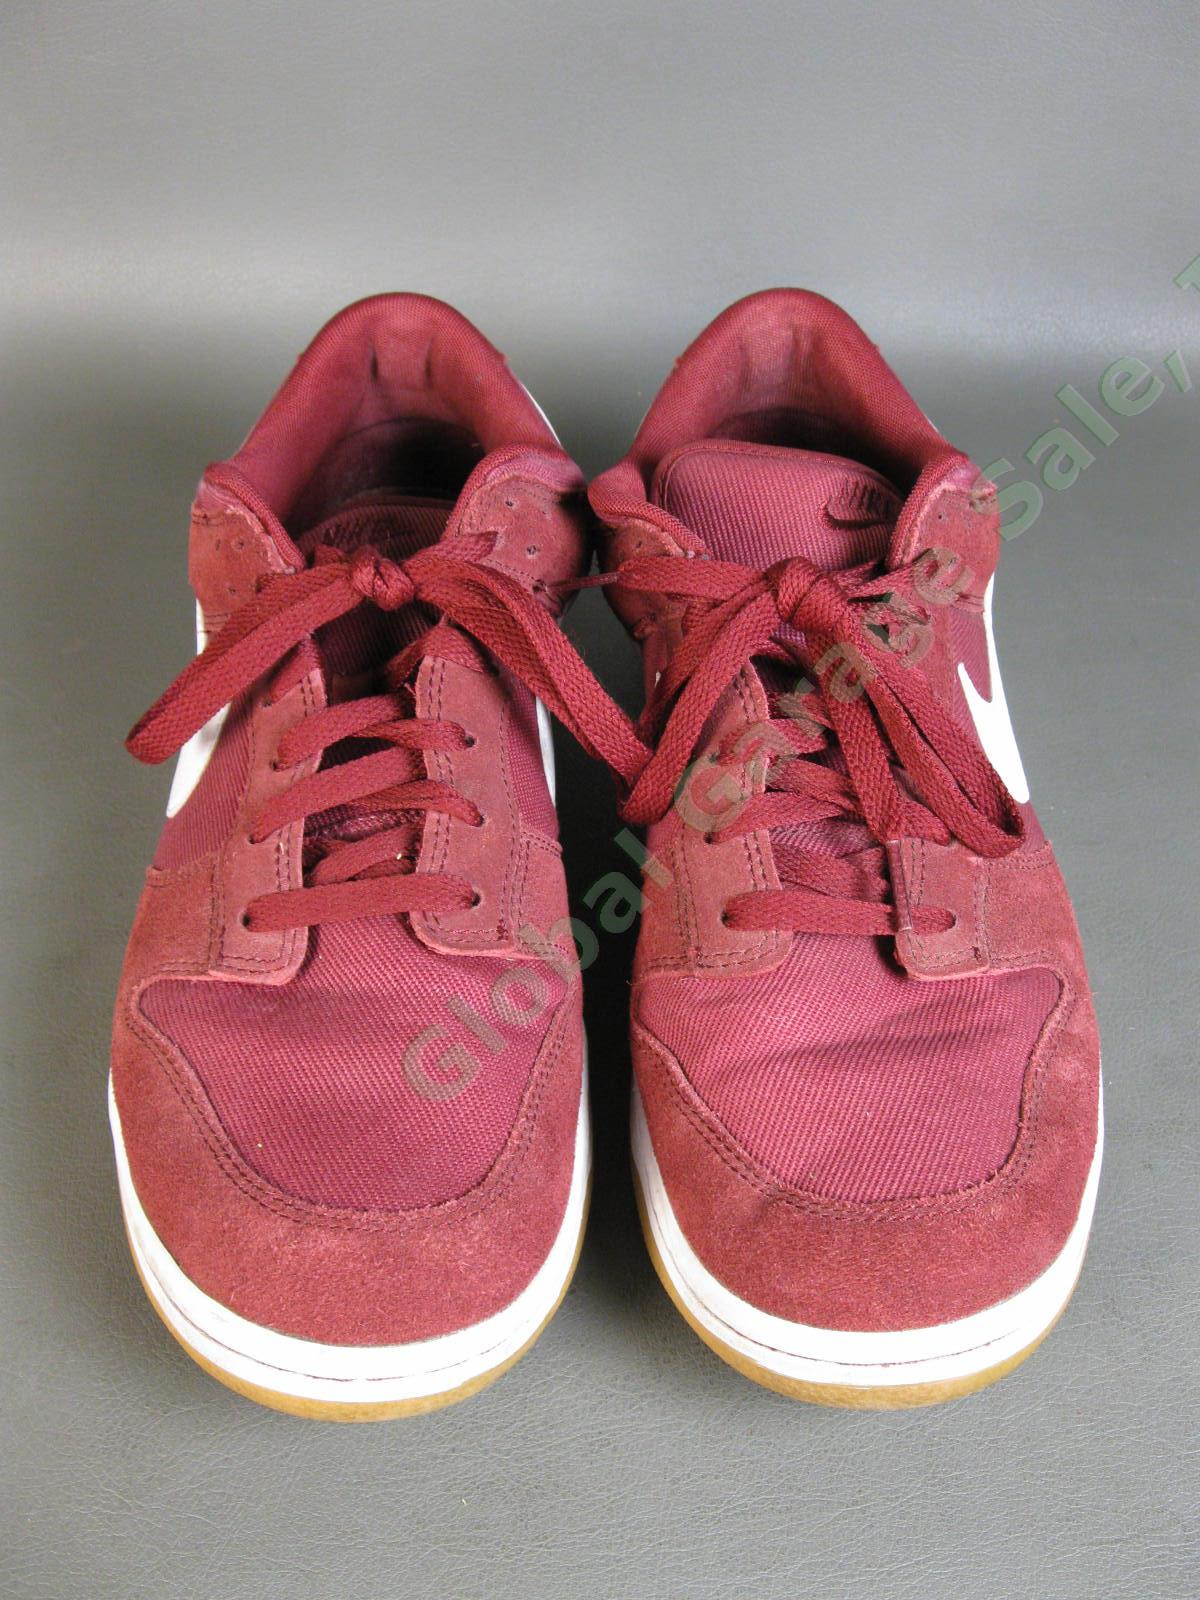 Nike Dunk Low Team Red White Sneaker Shoes AA1056-600 Canvas Burgundy Excellent 1